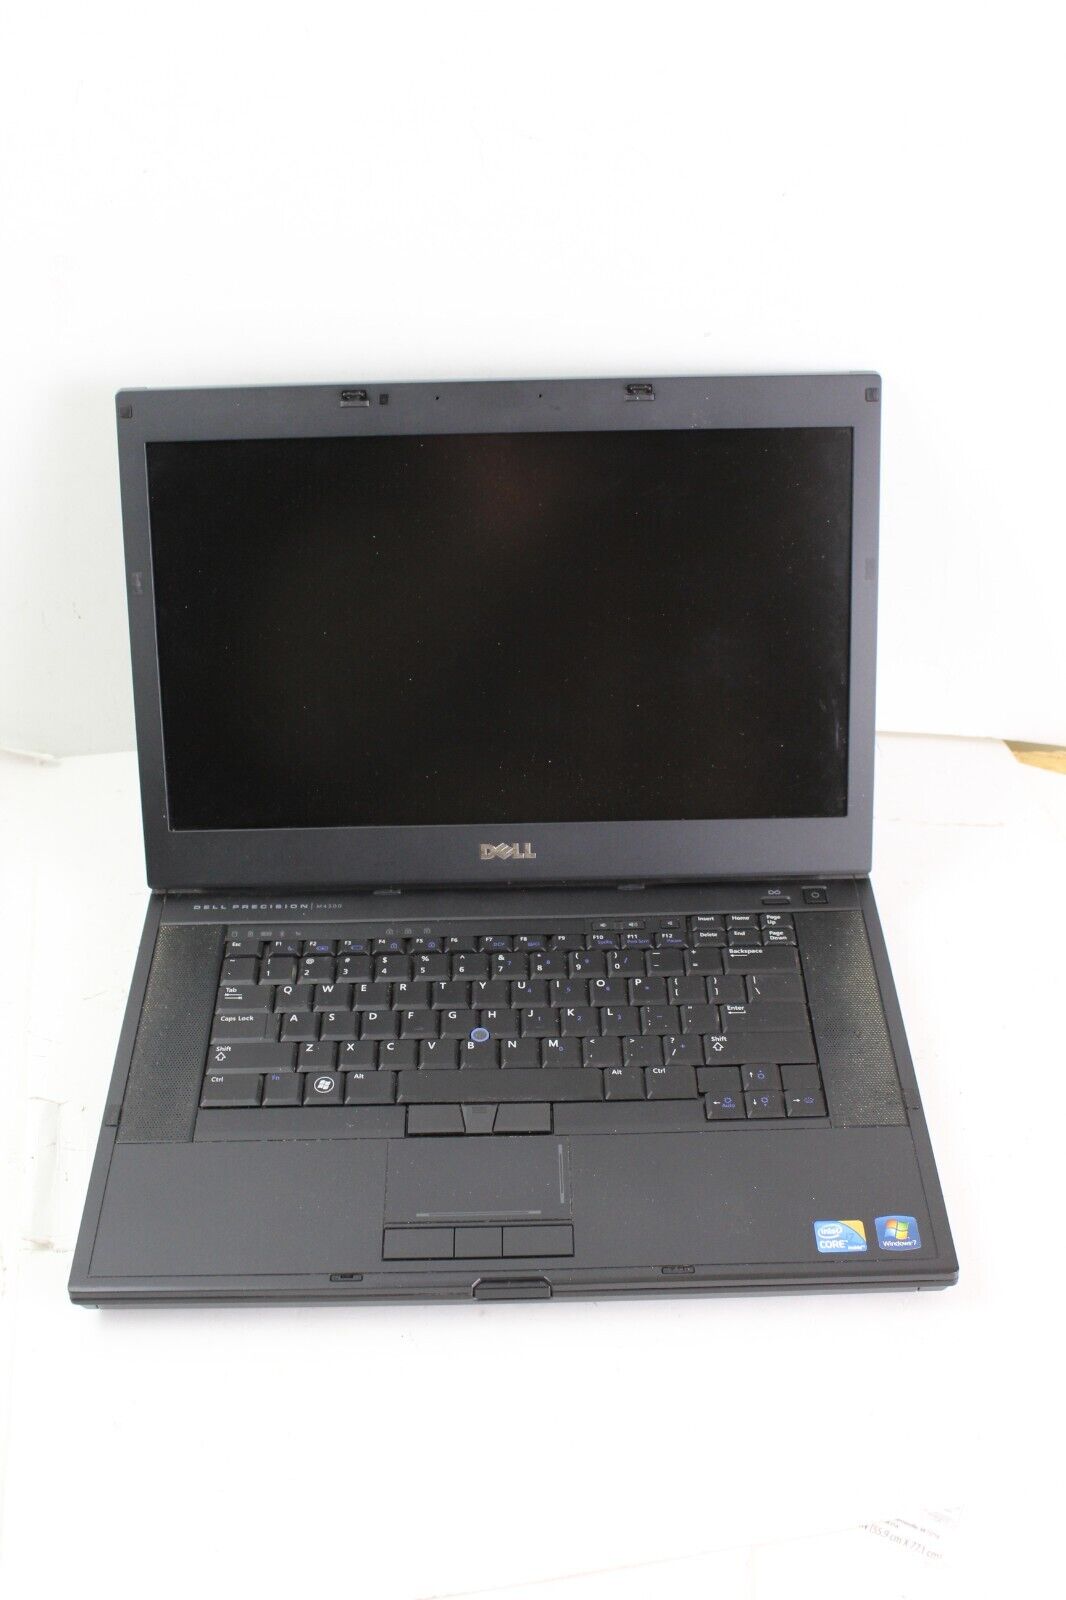 AS IS PARTS Dell Precision M4500 Laptop Intel i7 RAM UNKNOWN NO HDD